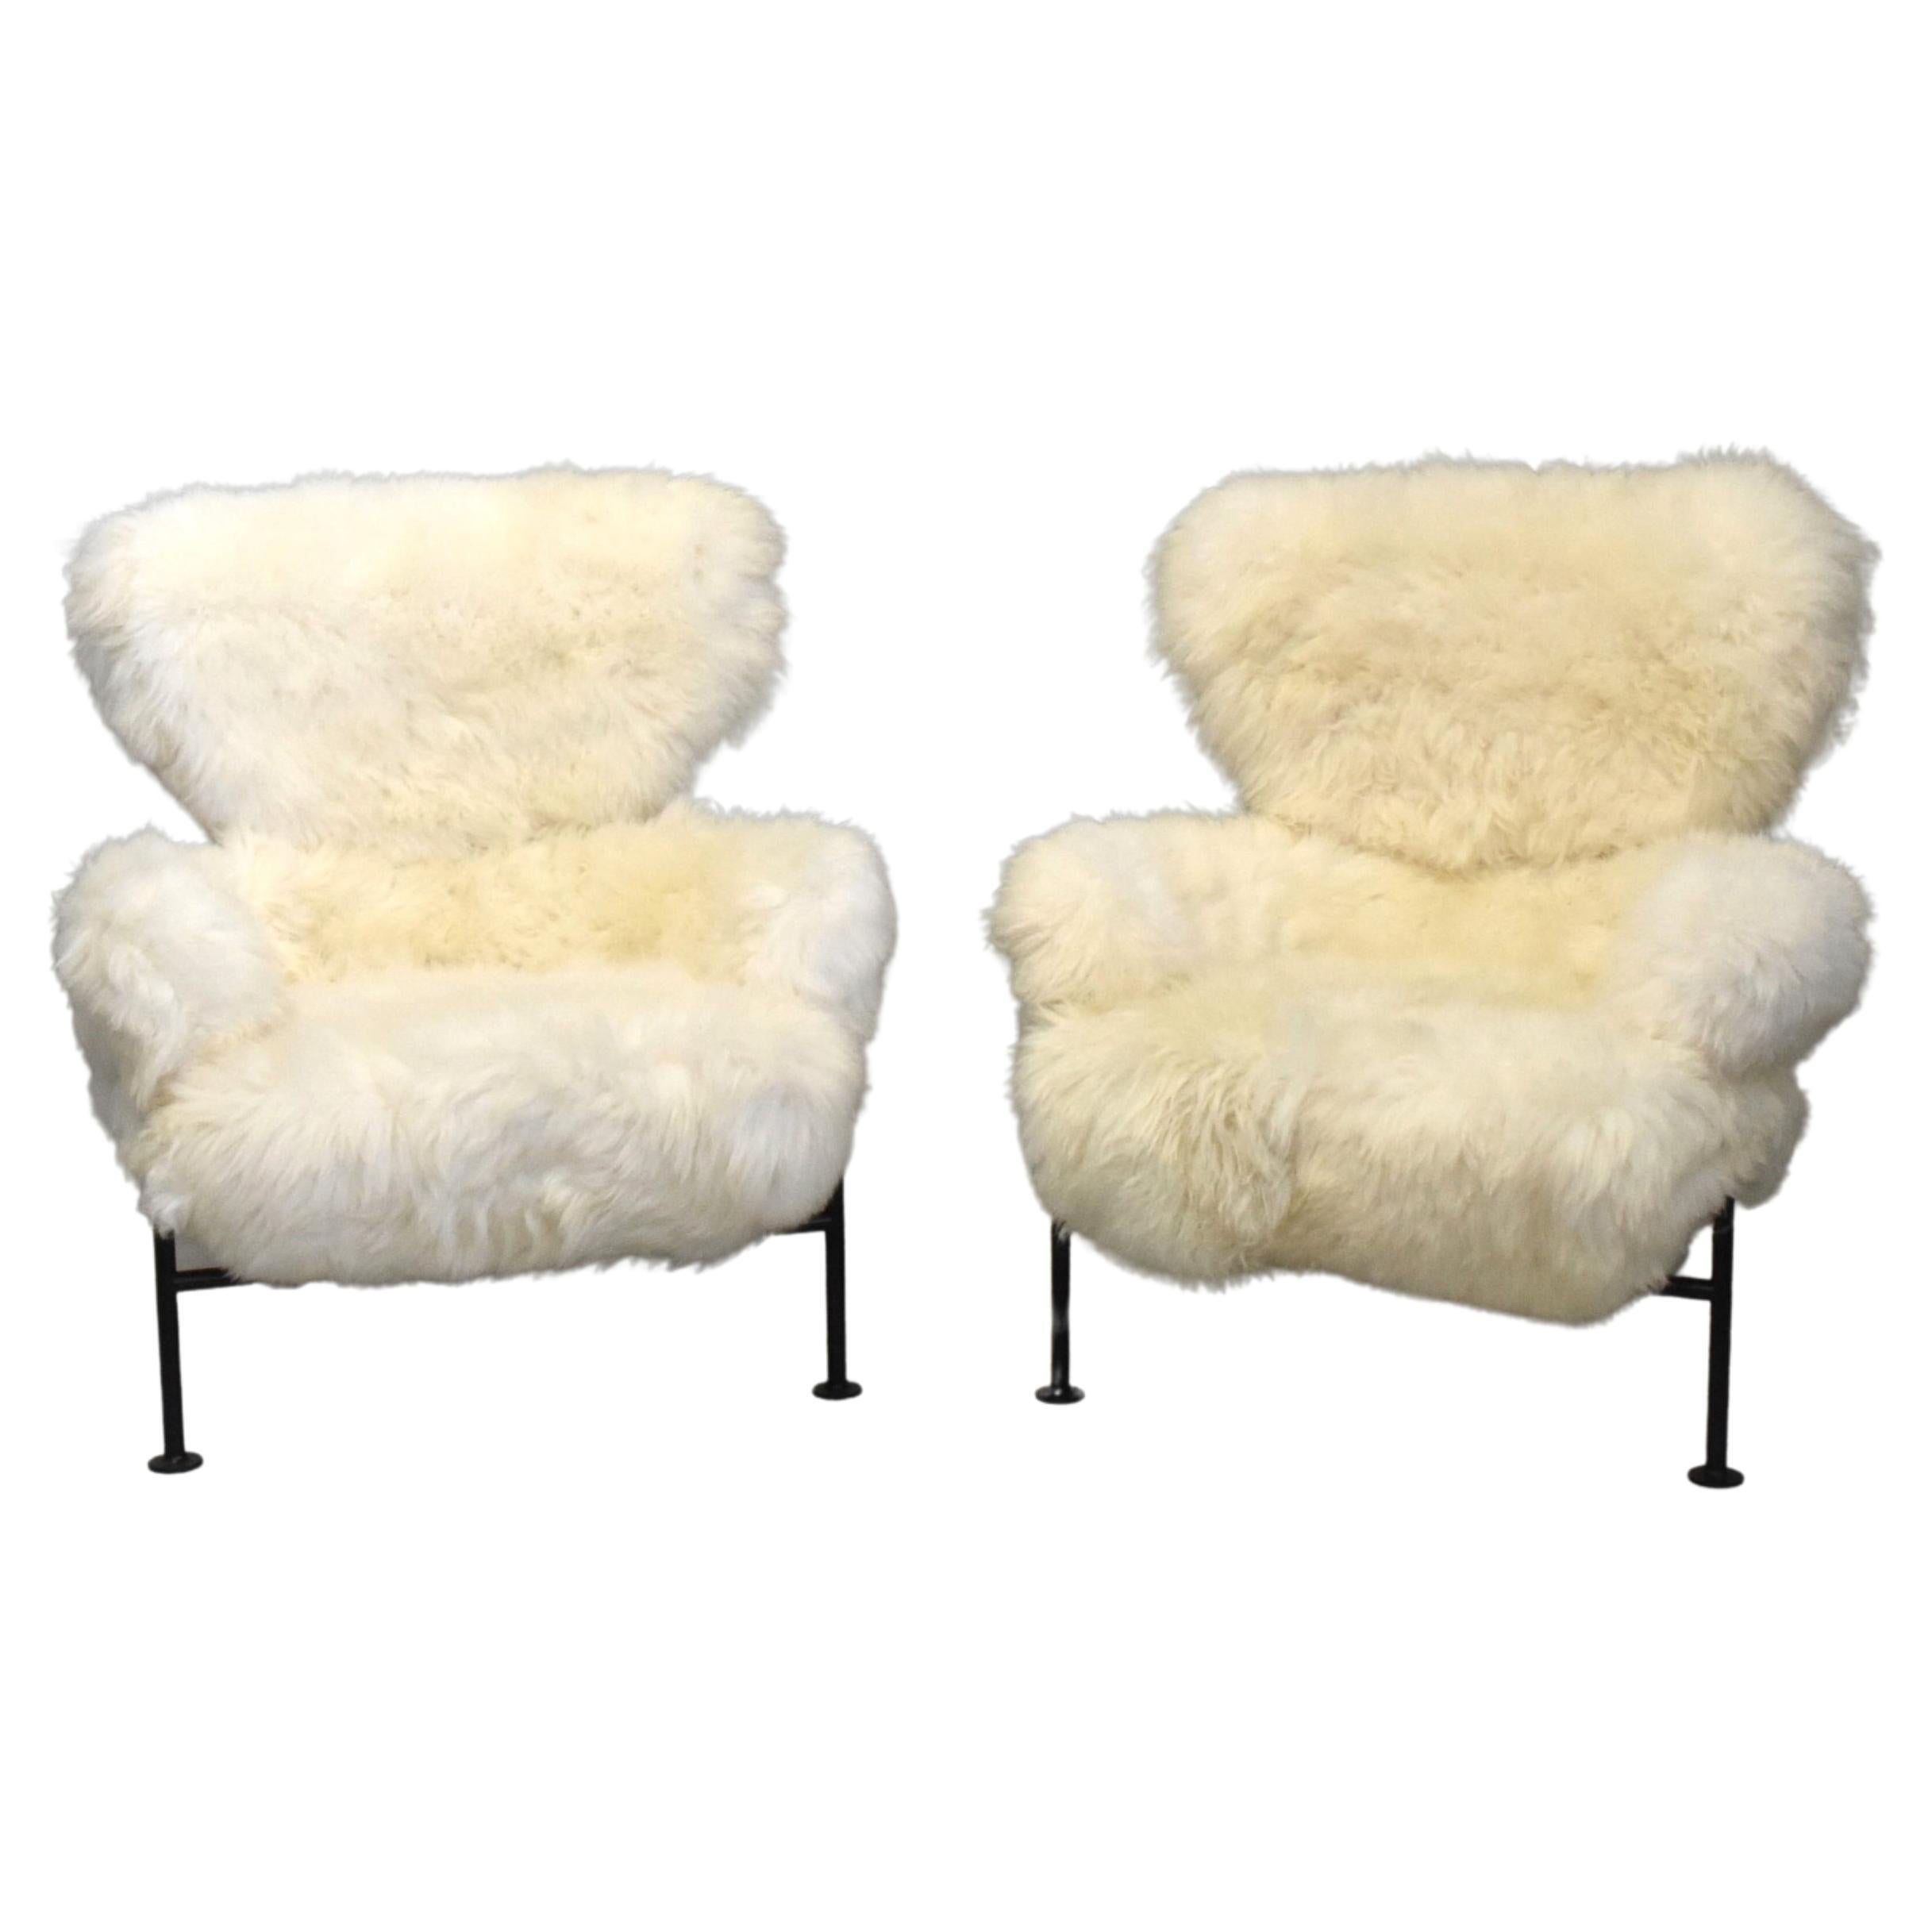 Armchair designed by Franco Albini (1905-1977) and Franca Helg Model n° PL19, 'Tre pezzi' 
Lacquered metal, brass and recently eupholstered in white sheep wool skin.
Early original models manufactured by Poggi in Italy around 1960.
Model created